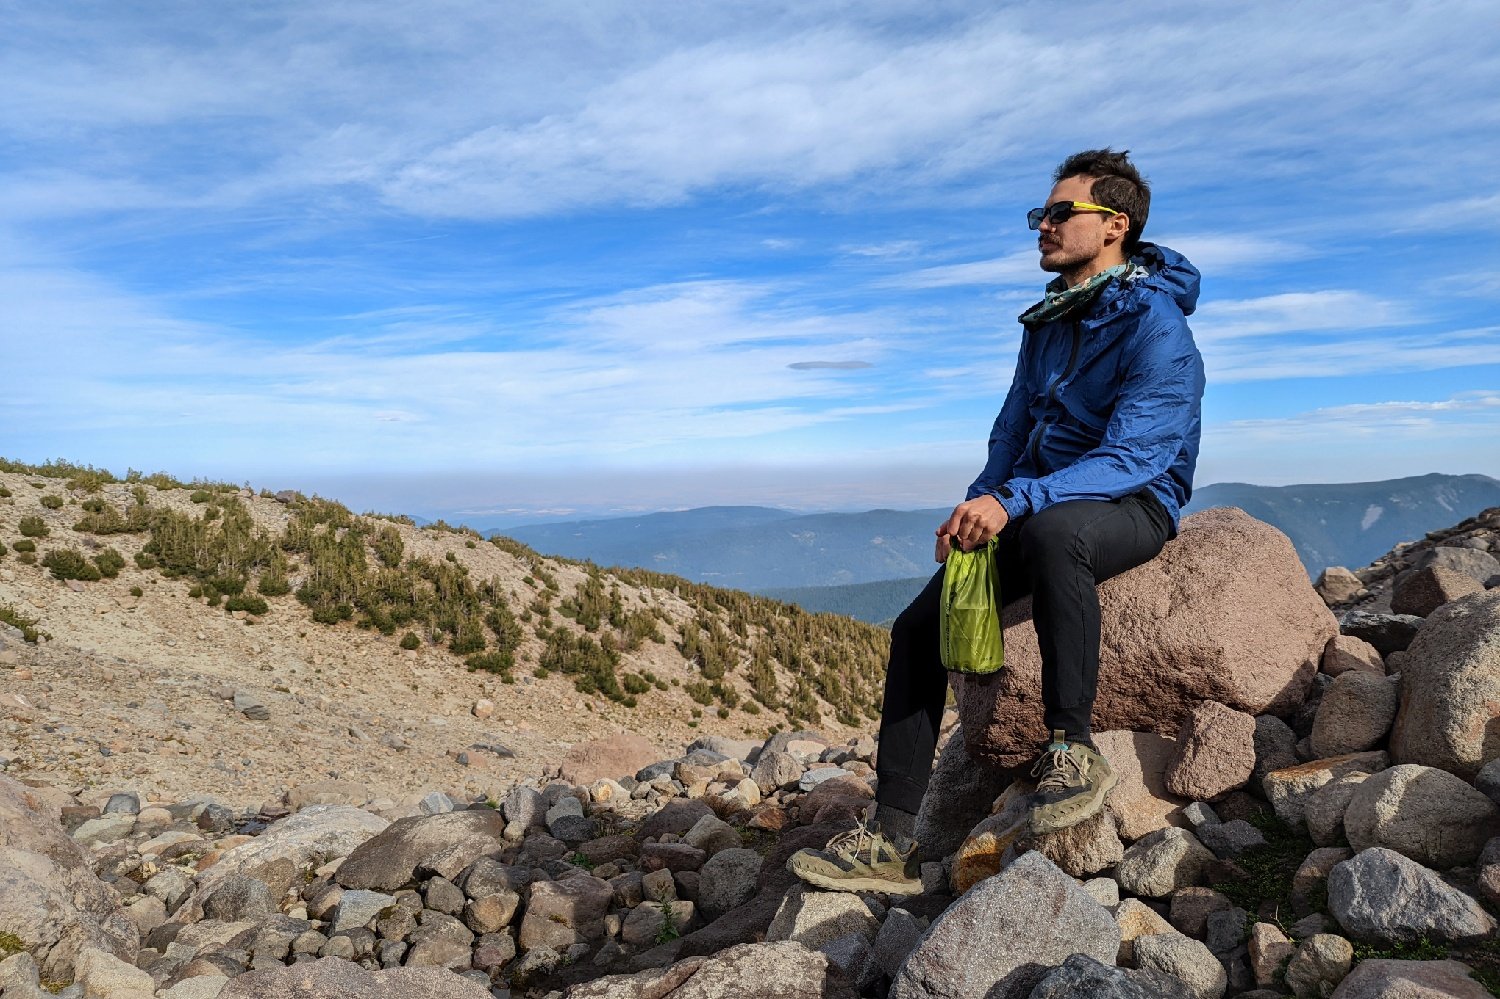 A hiker sitting on a rock in front of a mountain view holding a Sea to Summit Ultra Sil Dry Bag